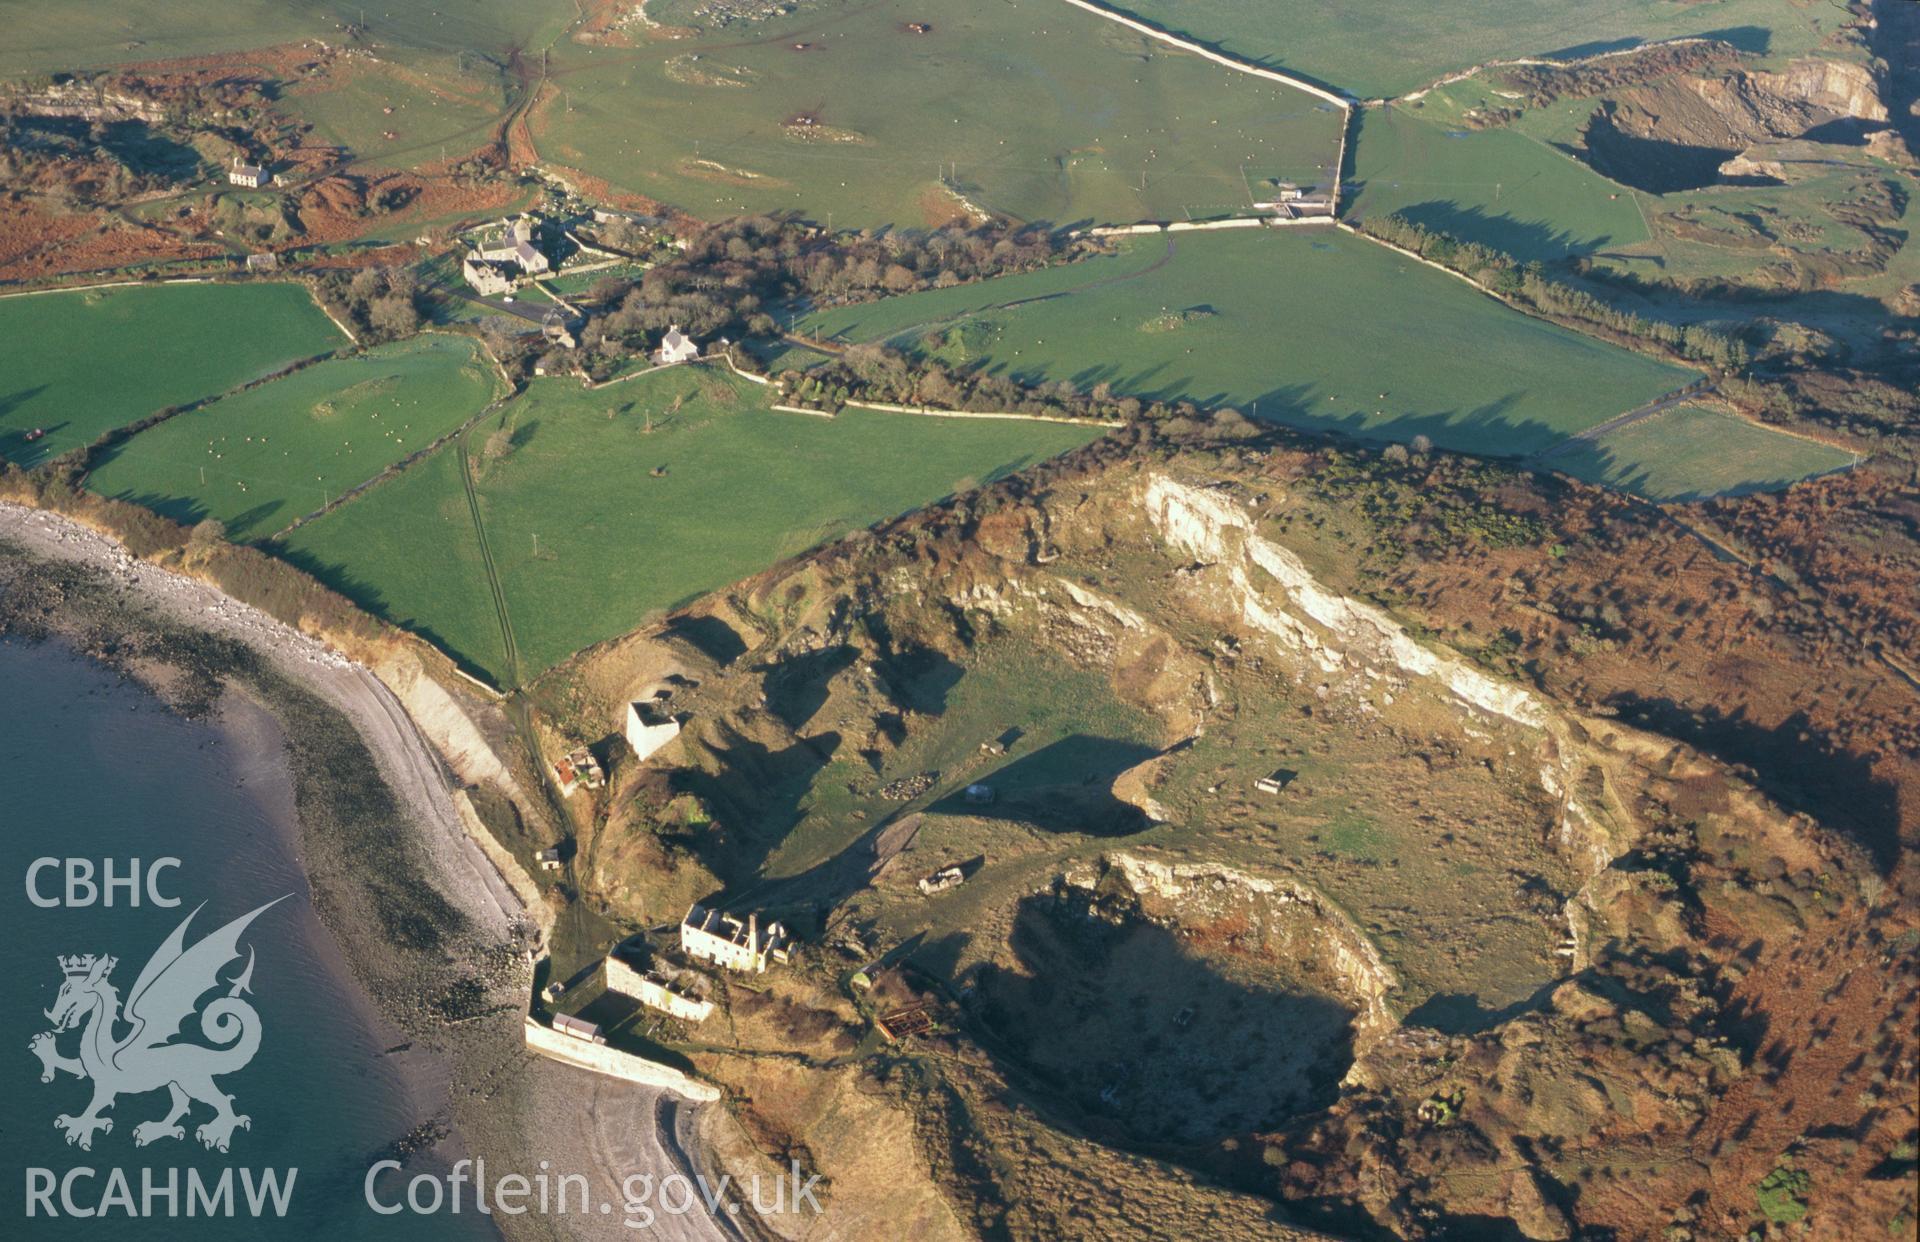 RCAHMW colour slide oblique aerial photograph of Penmon Priory, taken on 10/01/1999 by Toby Driver